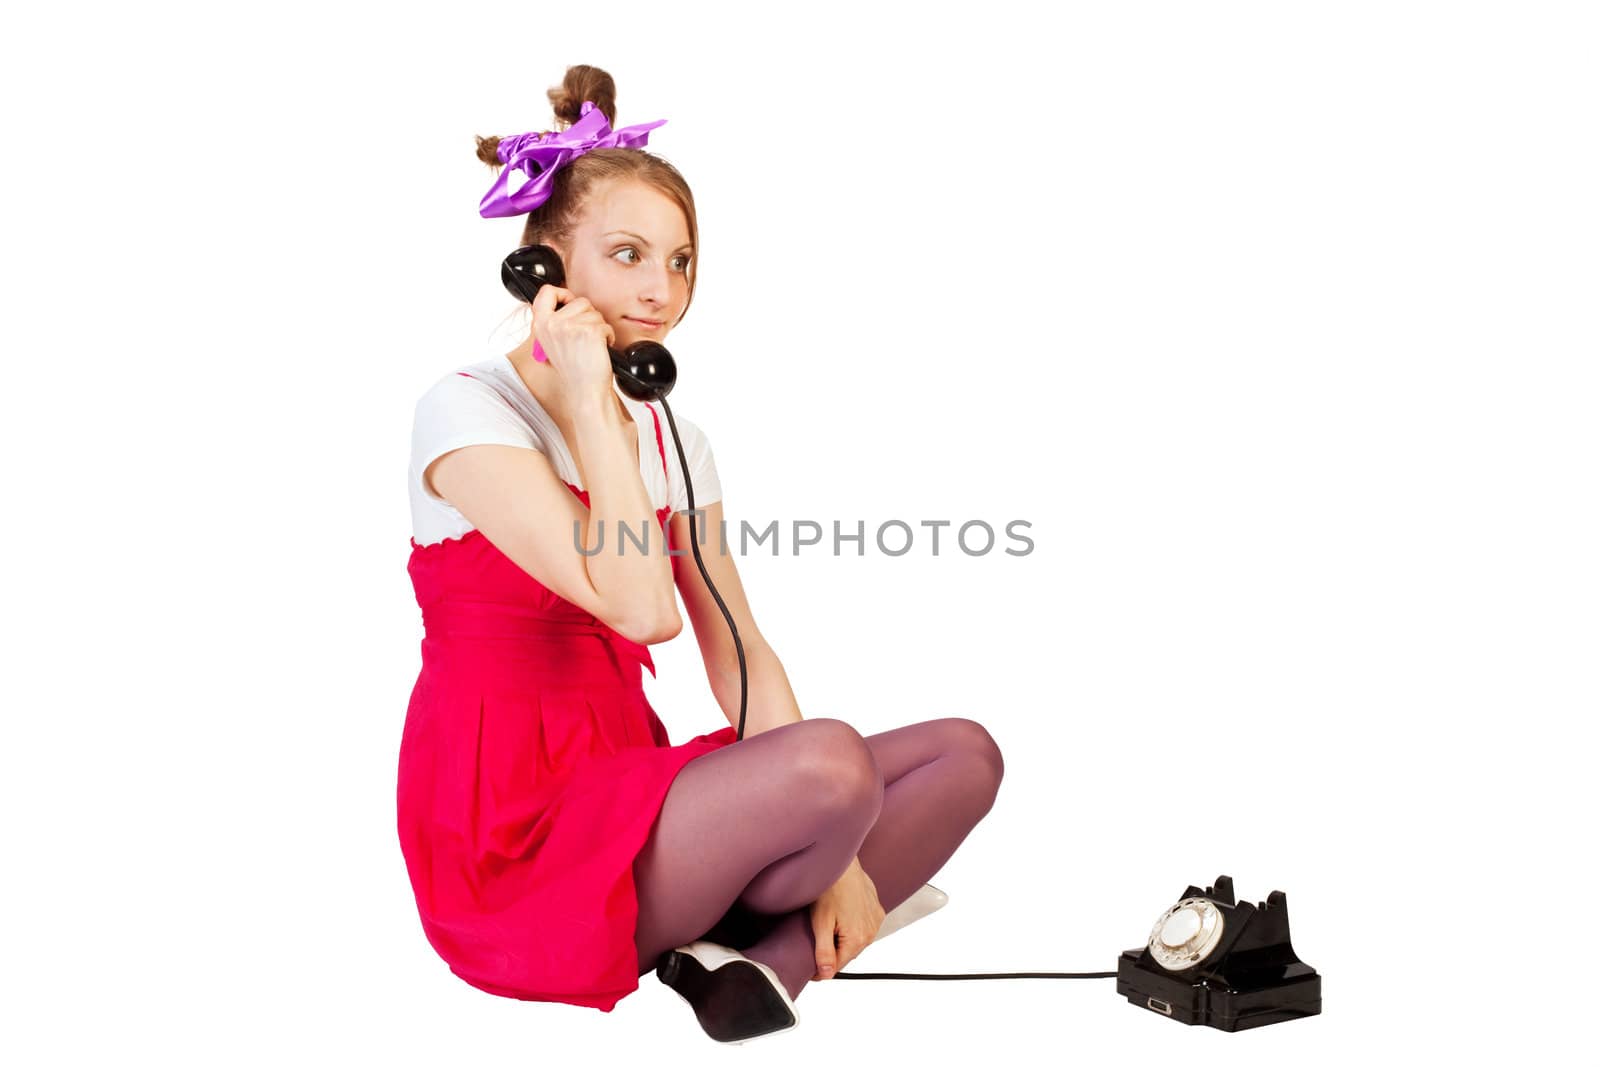 people series: young girl in bright clothes speak on phone